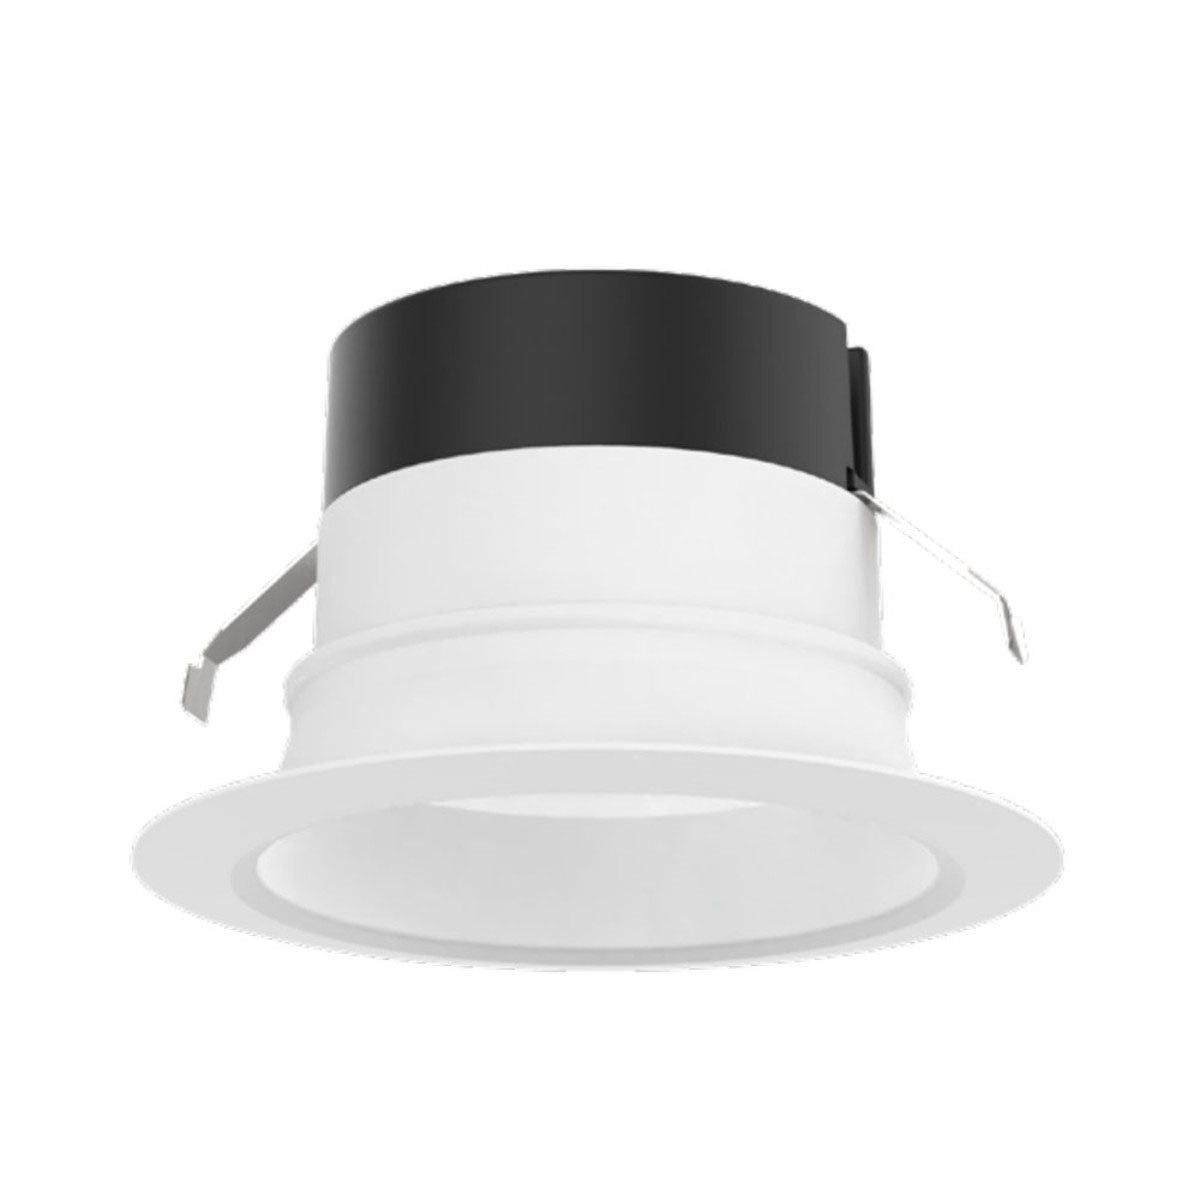 4 Inch Recessed LED Can Light, Round, 8 Watt, 700 Lumens, Selectable CCT, 2700K to 5000K, Smooth Trim